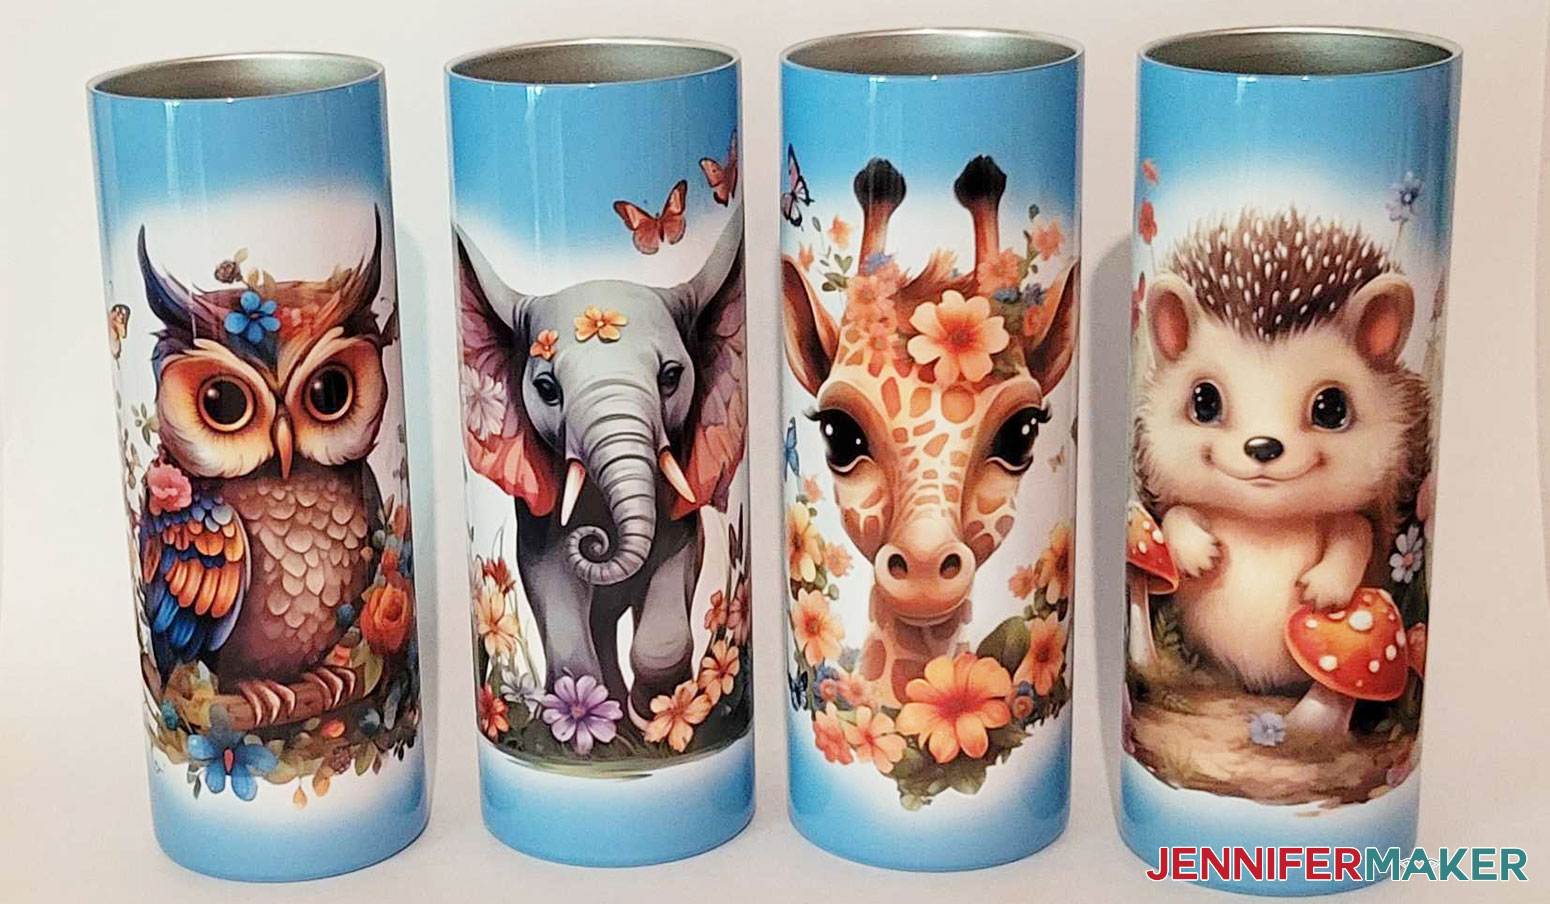 The tumblers are ready to gift or use.